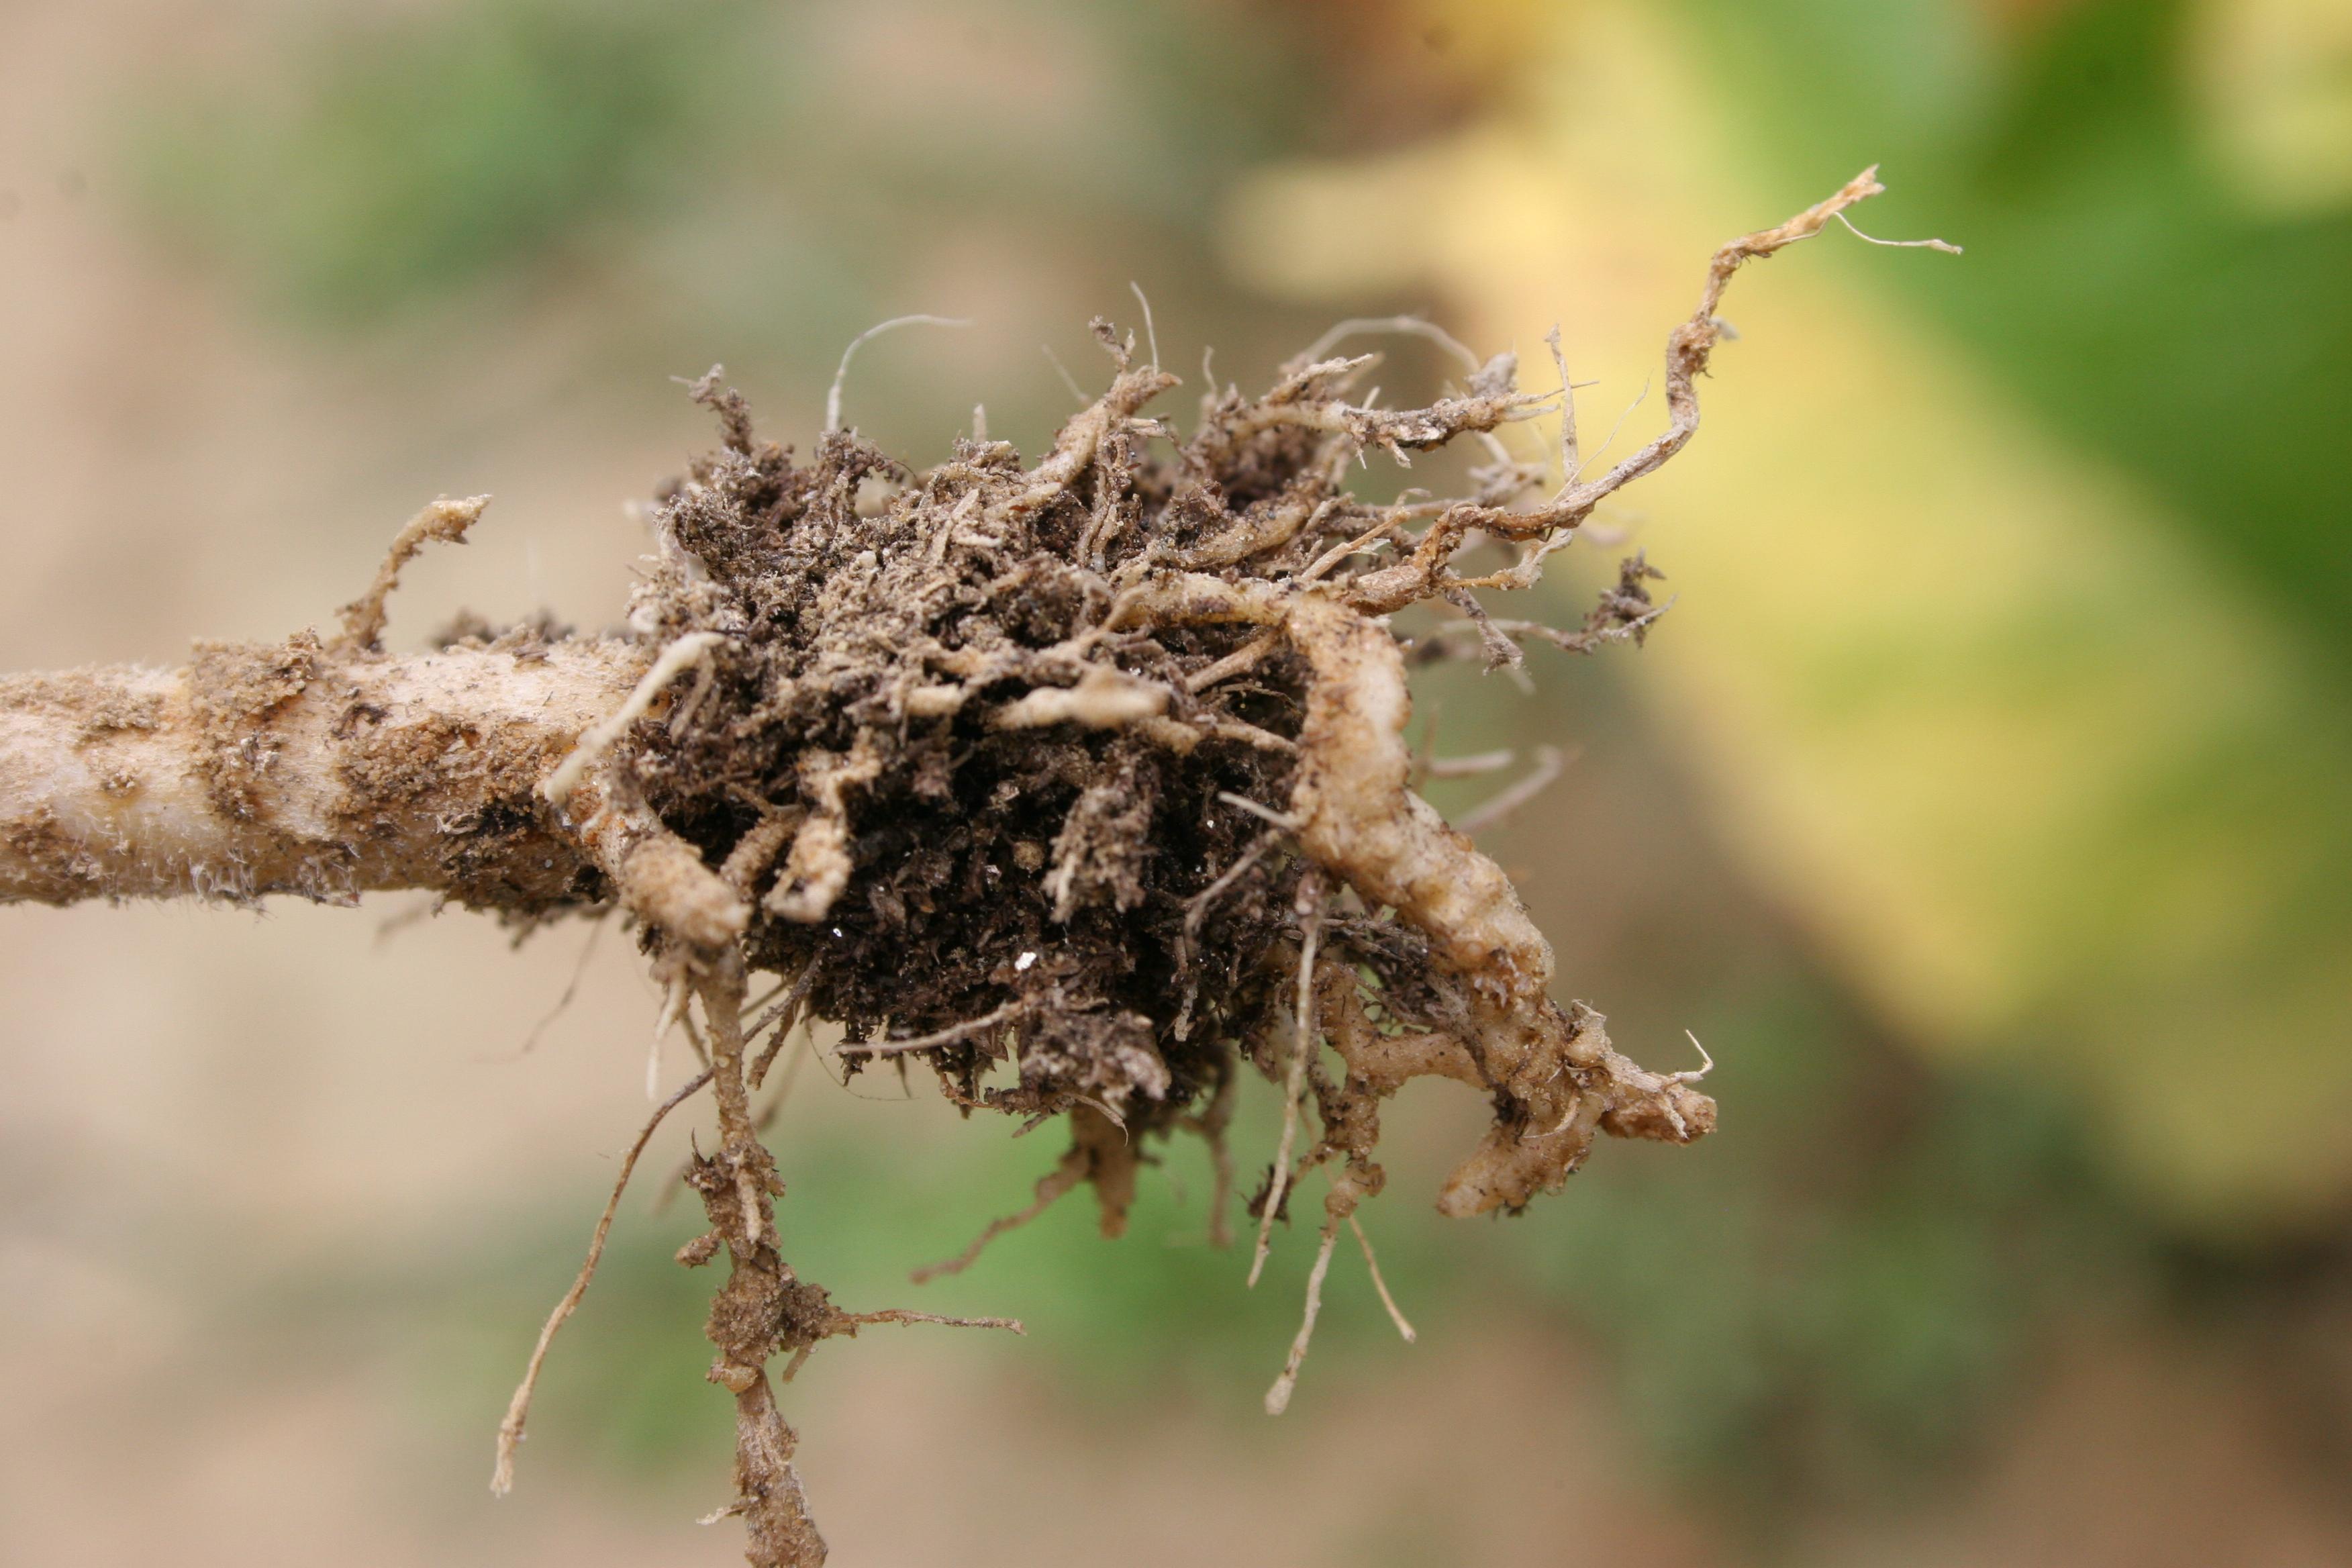 Galls and swellings form on roots infected with root knot nematode.  Roots become dysfunctional, which results in the above ground symptoms of stunting, yellowing, and wilting.  Severely infected plants die.  (Photo: Kenneth Seebold)